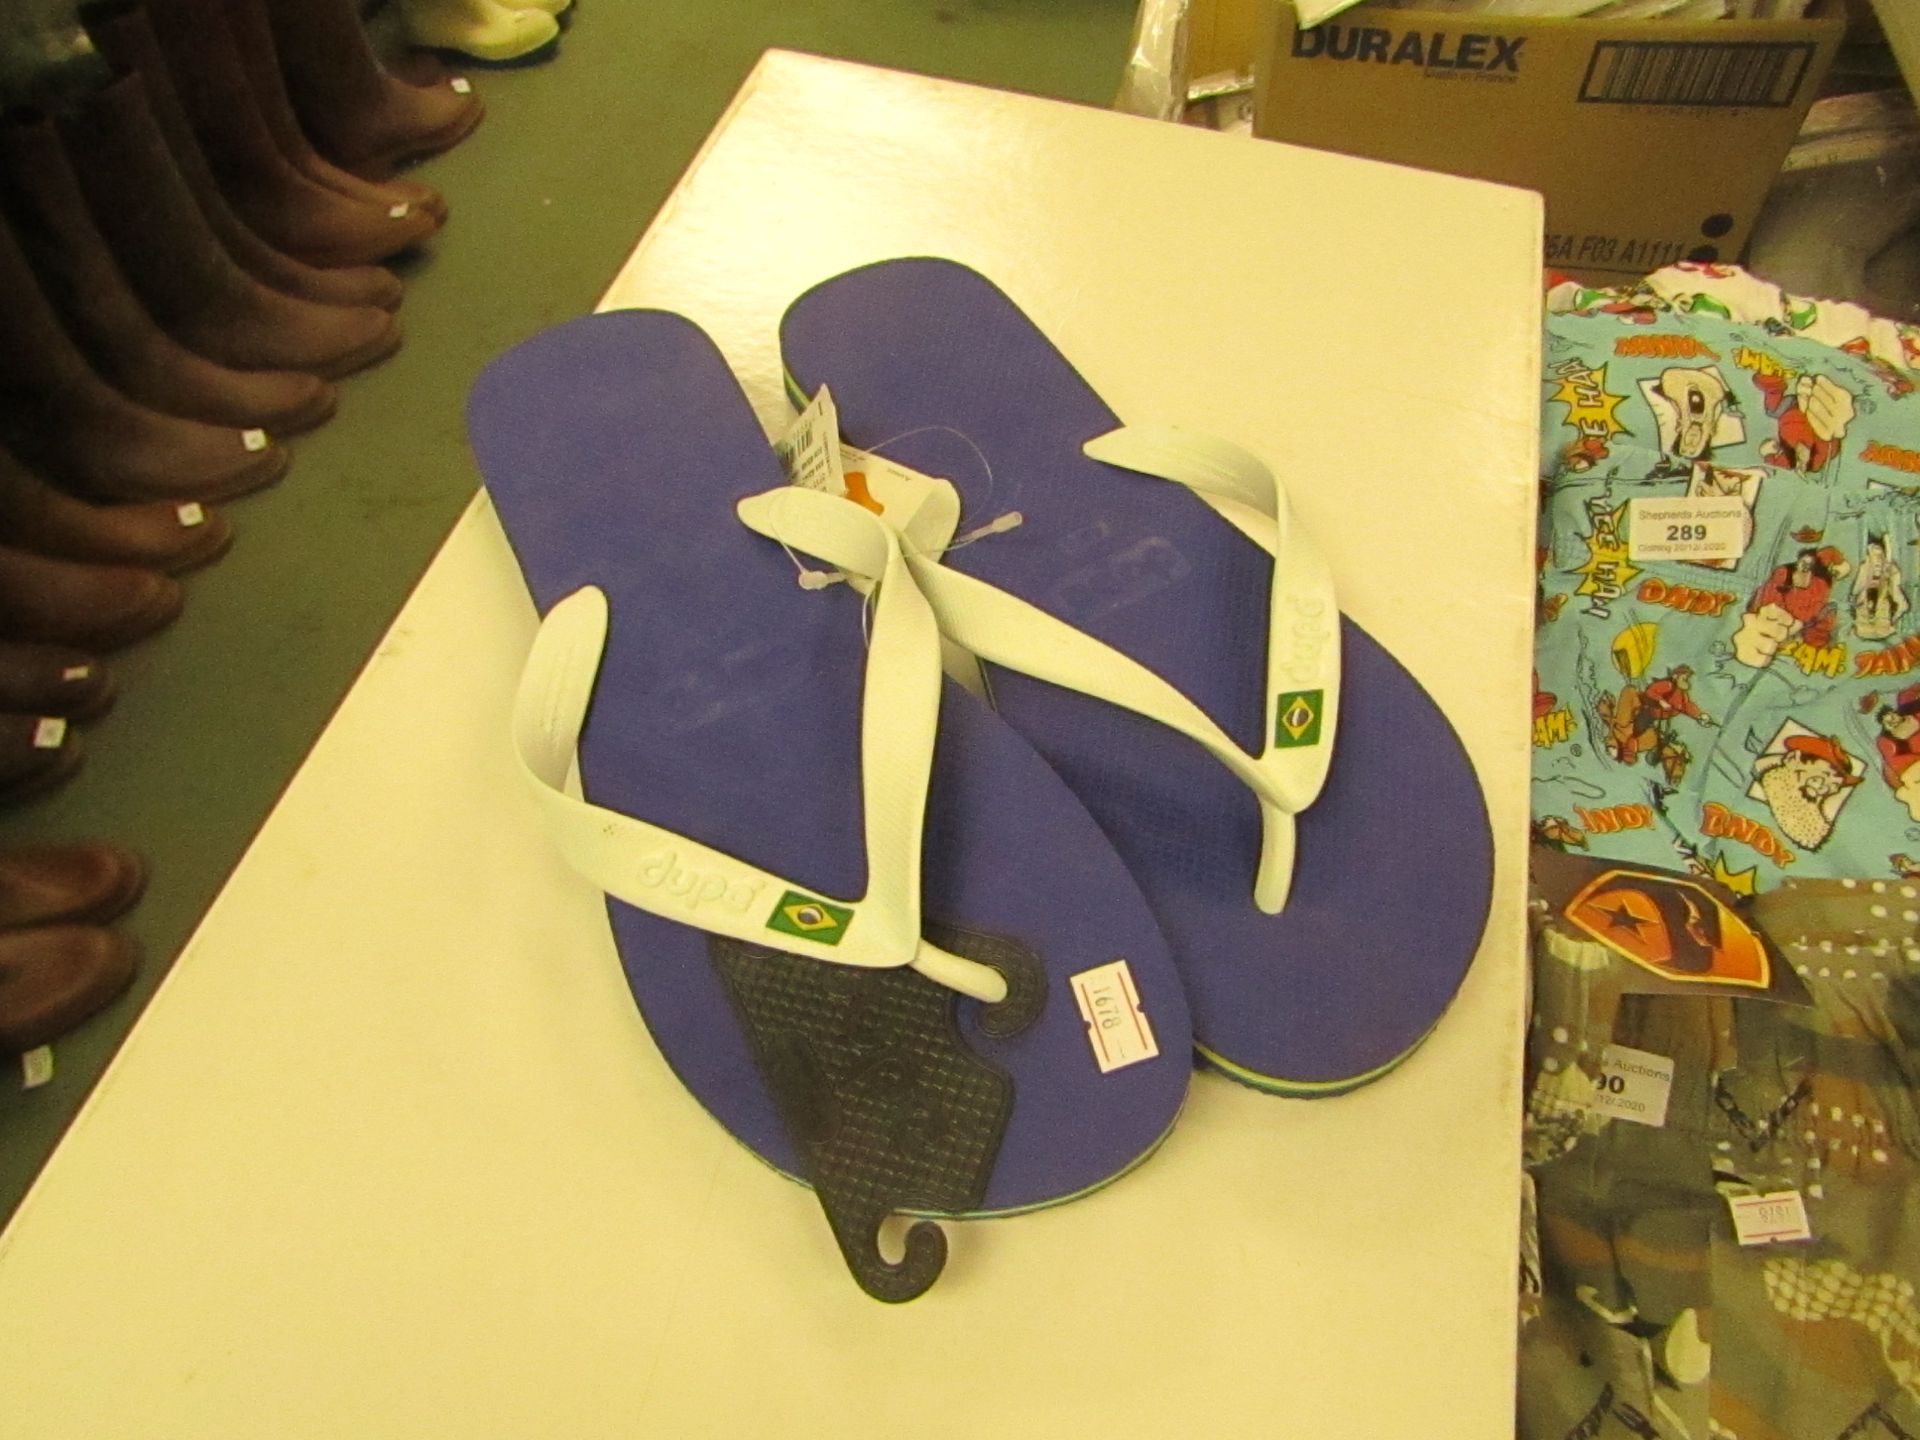 3x pairs of Dupe Flip Flops, new, all sizes 45/46